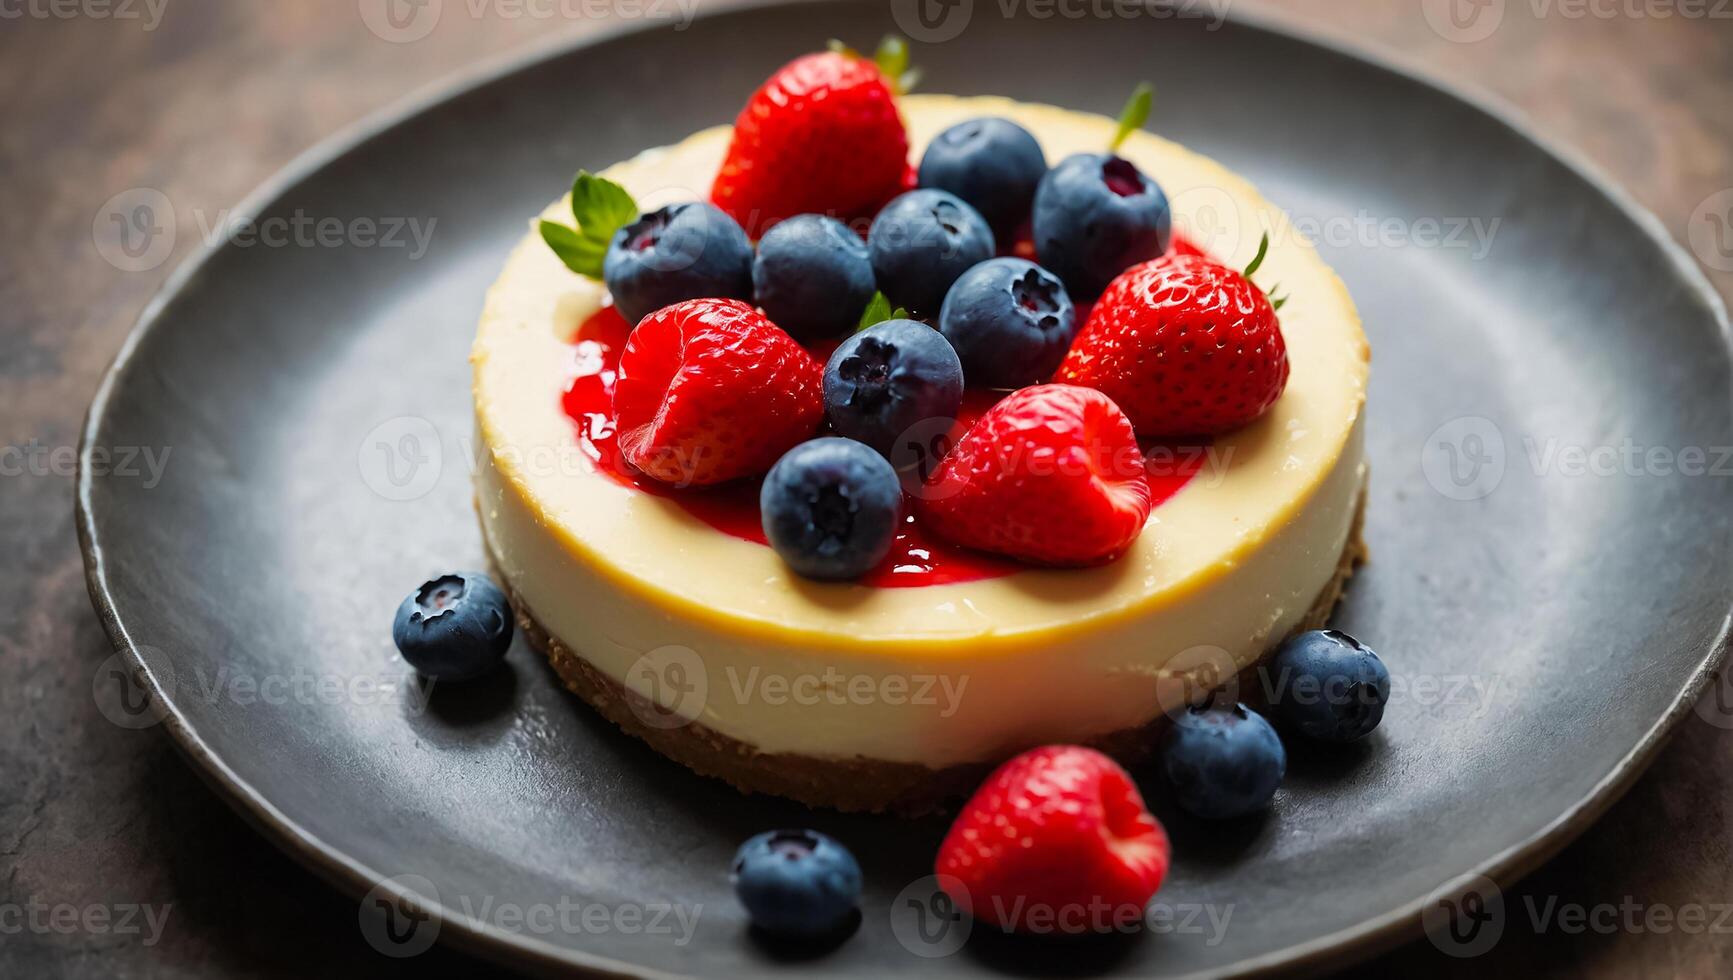 delicious cheesecake with berries on the table photo